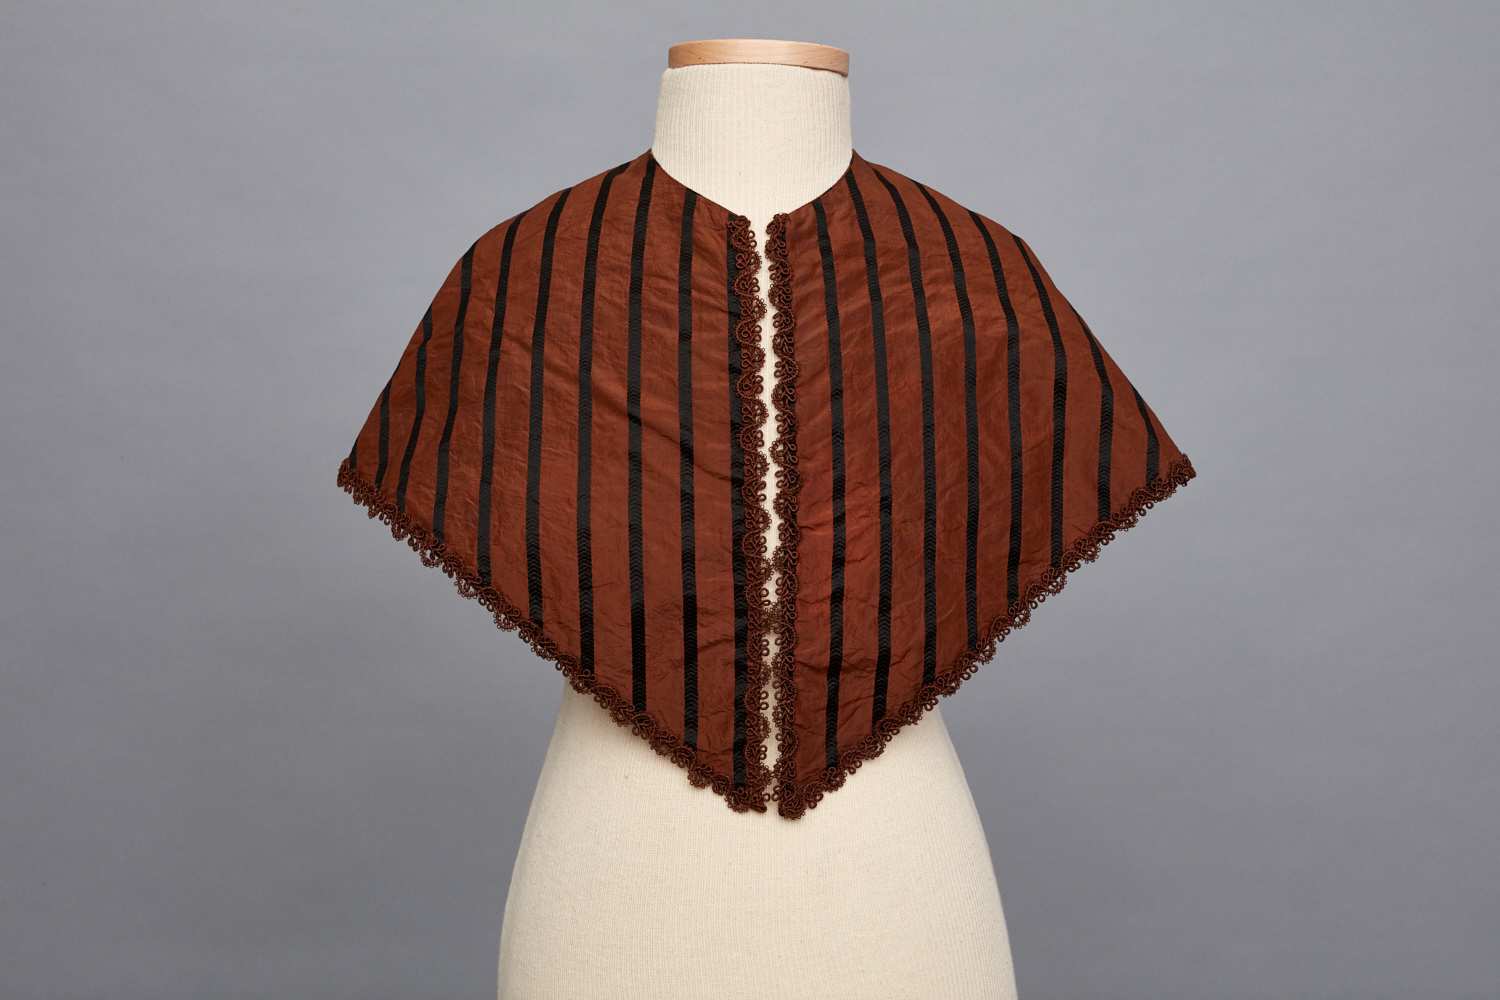 A brown and black striped shawl on a mannequin.